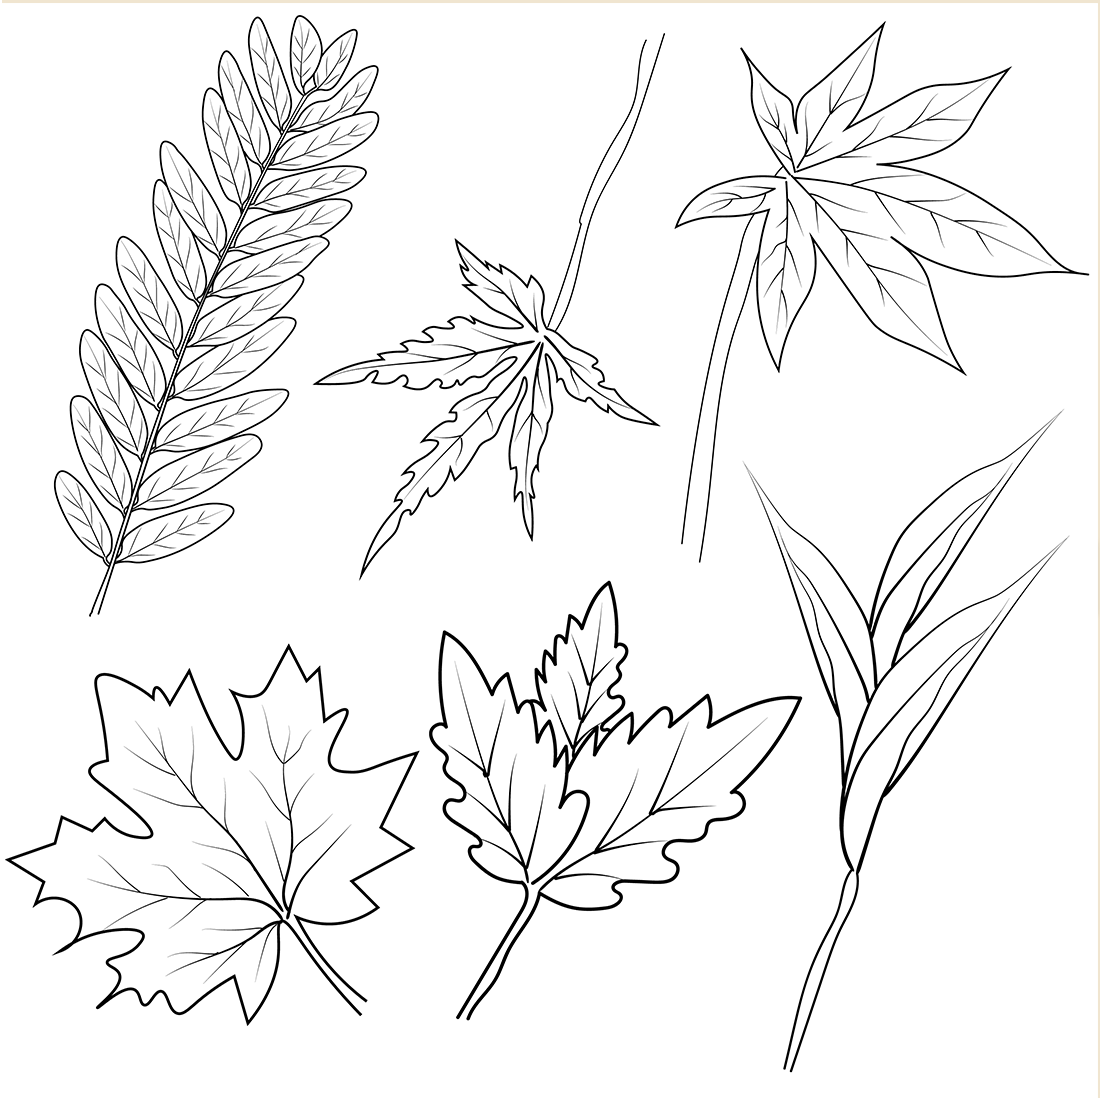 Set of hand-drawn black and white autumn falling leaves - rowan, oak, chestnut, maple, ginkgo, aspen, sketch art style vector preview image.